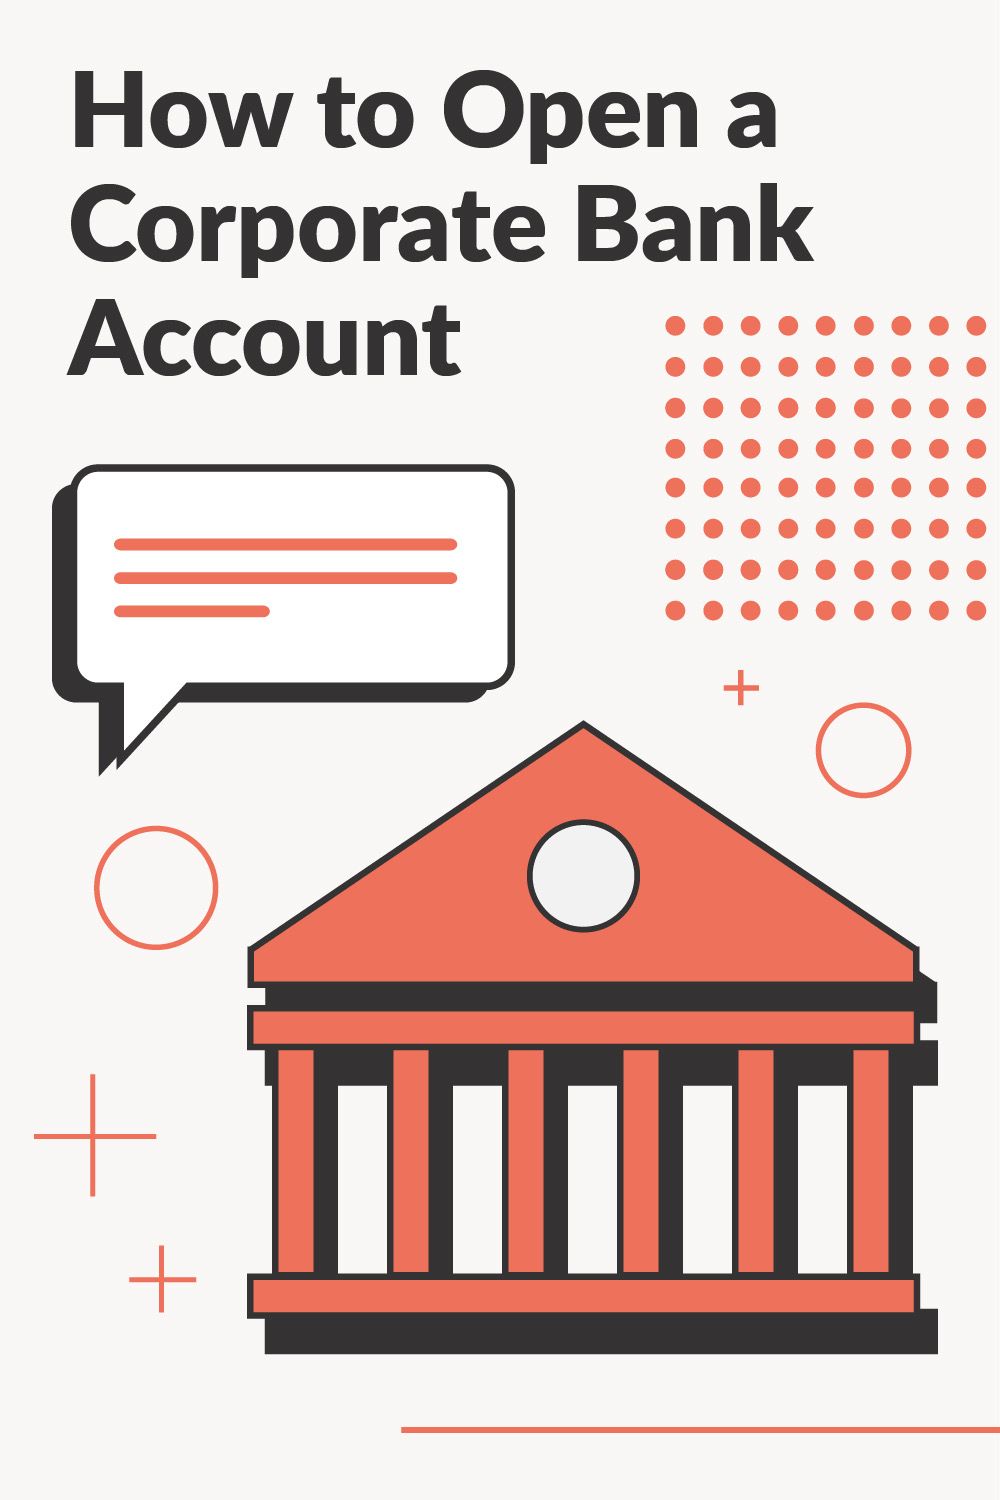 How To Open A Corporate Bank Account Pinterest Image